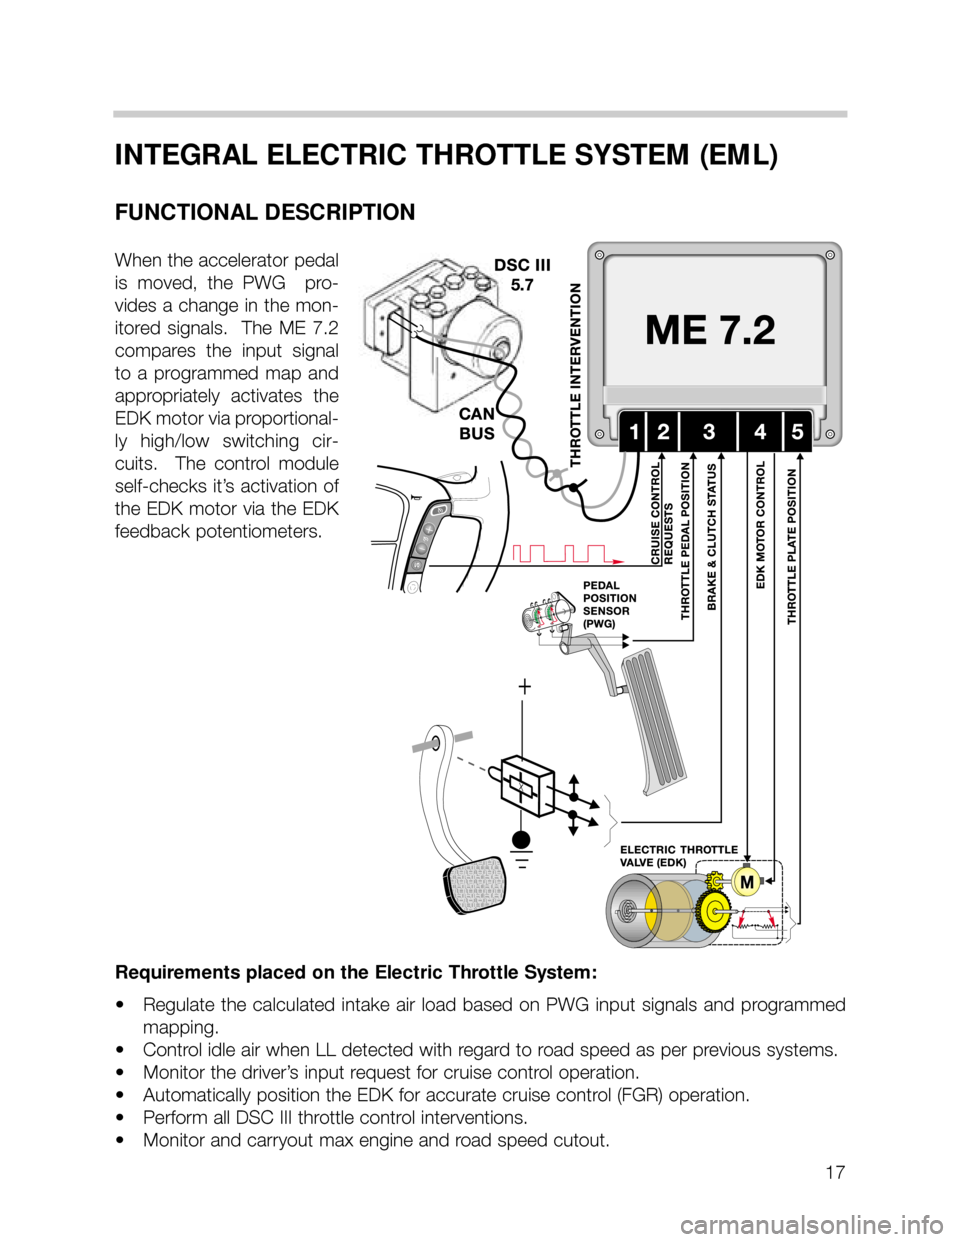 BMW 740i 2001 E38 M62TU Engine Workshop Manual 17
INTEGRAL ELECTRIC THROTTLE SYSTEM (EML)
FUNCTIONAL DESCRIPTION
When the accelerator pedal
is  moved,  the  PWG    pro-
vides a change in the mon-
itored  signals.    The  ME  7.2
compares  the  inp